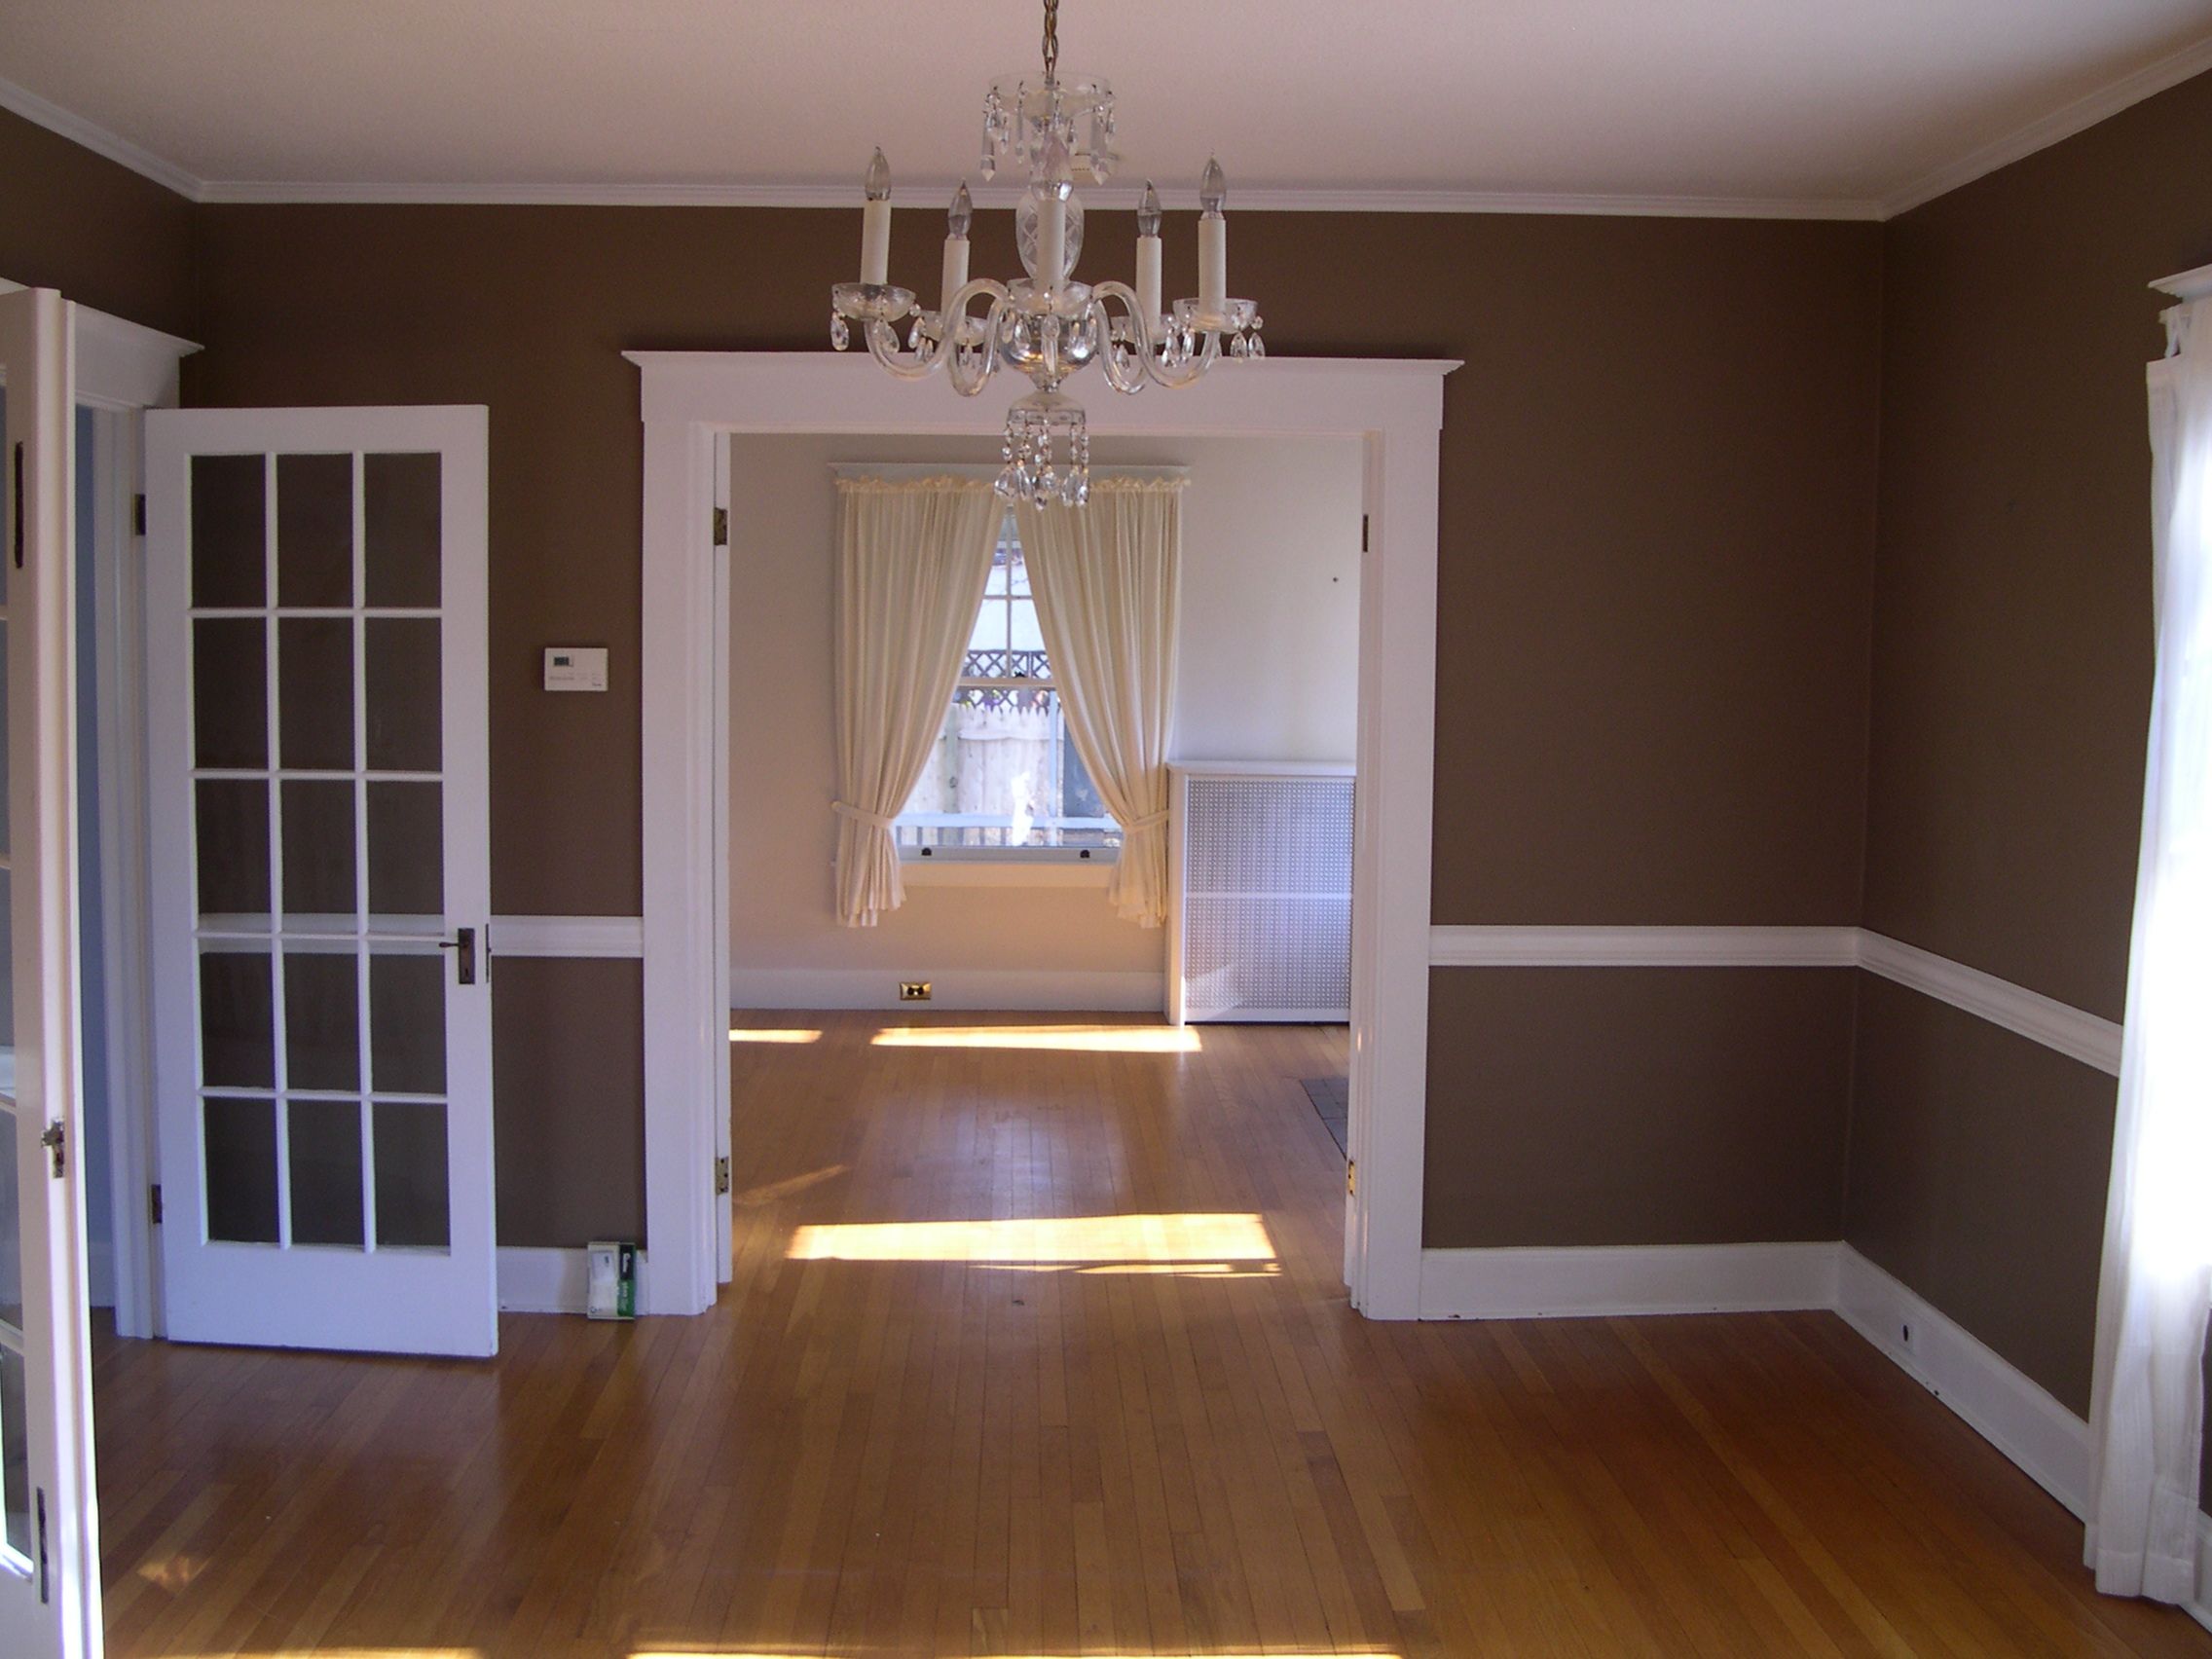 From December 2005, right after we bought the house. Dining room.